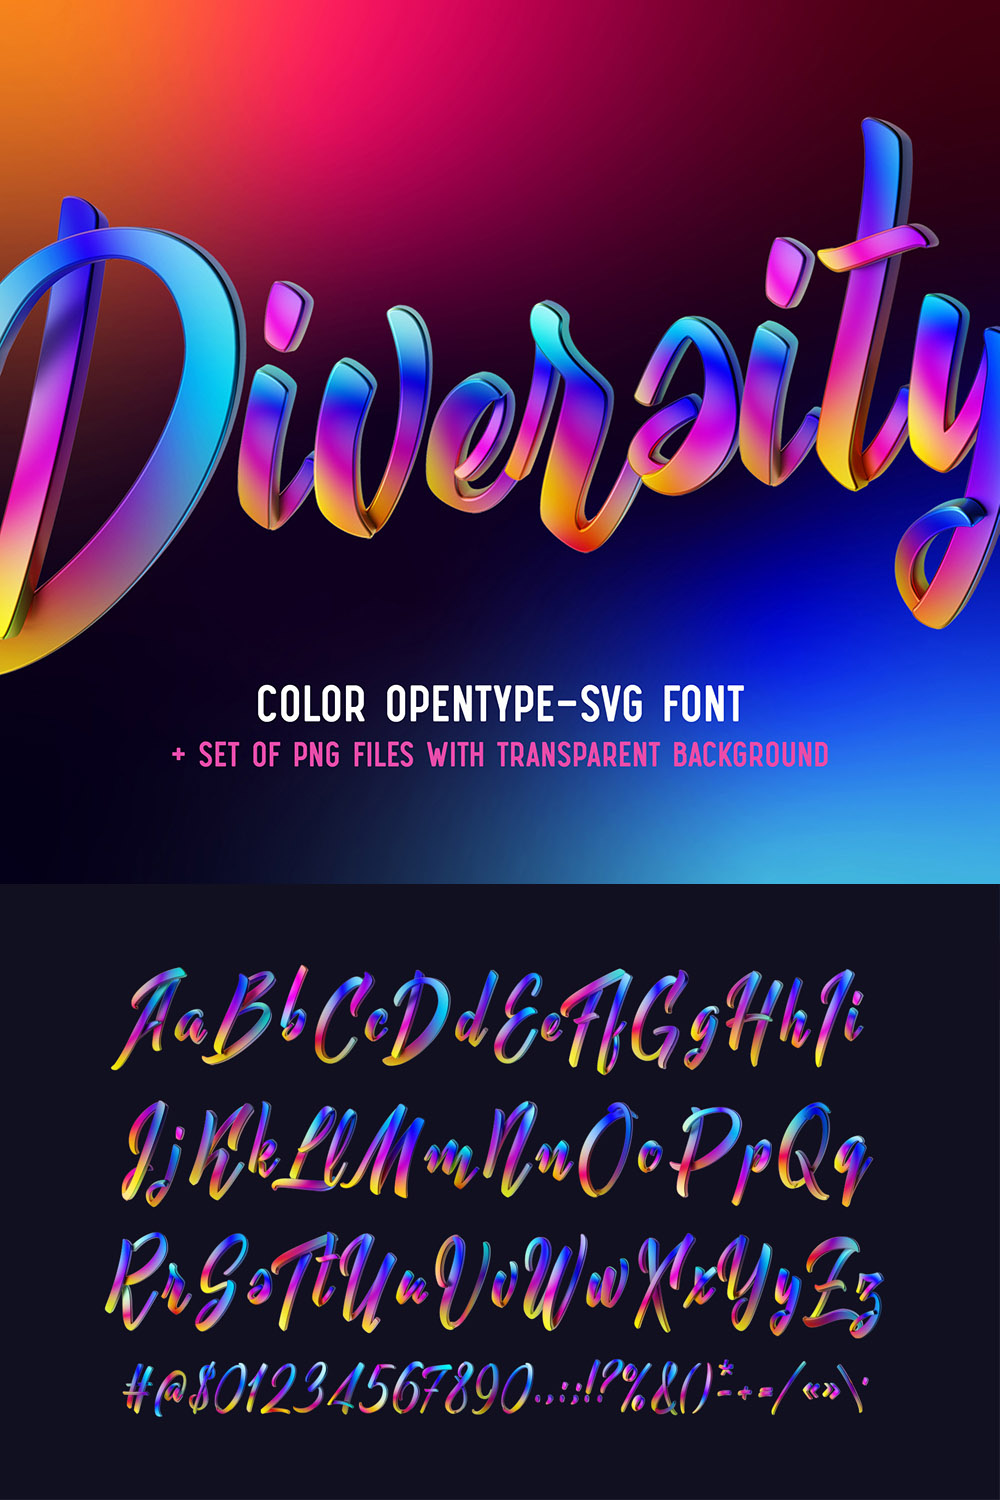 Colorful text wrote by Diversity font.